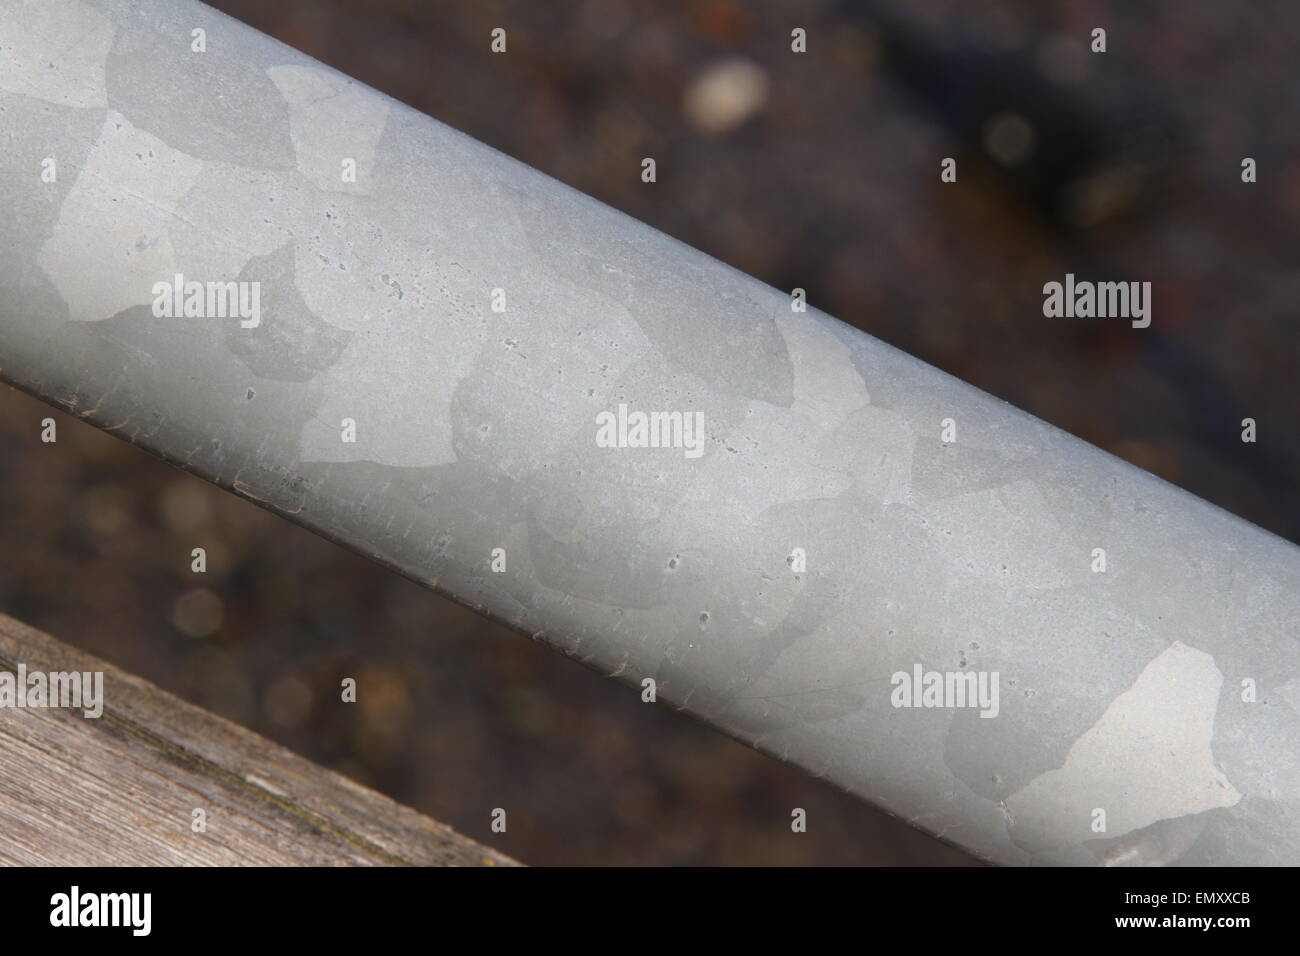 Steel pipe isolated on darker background. Stock Photo